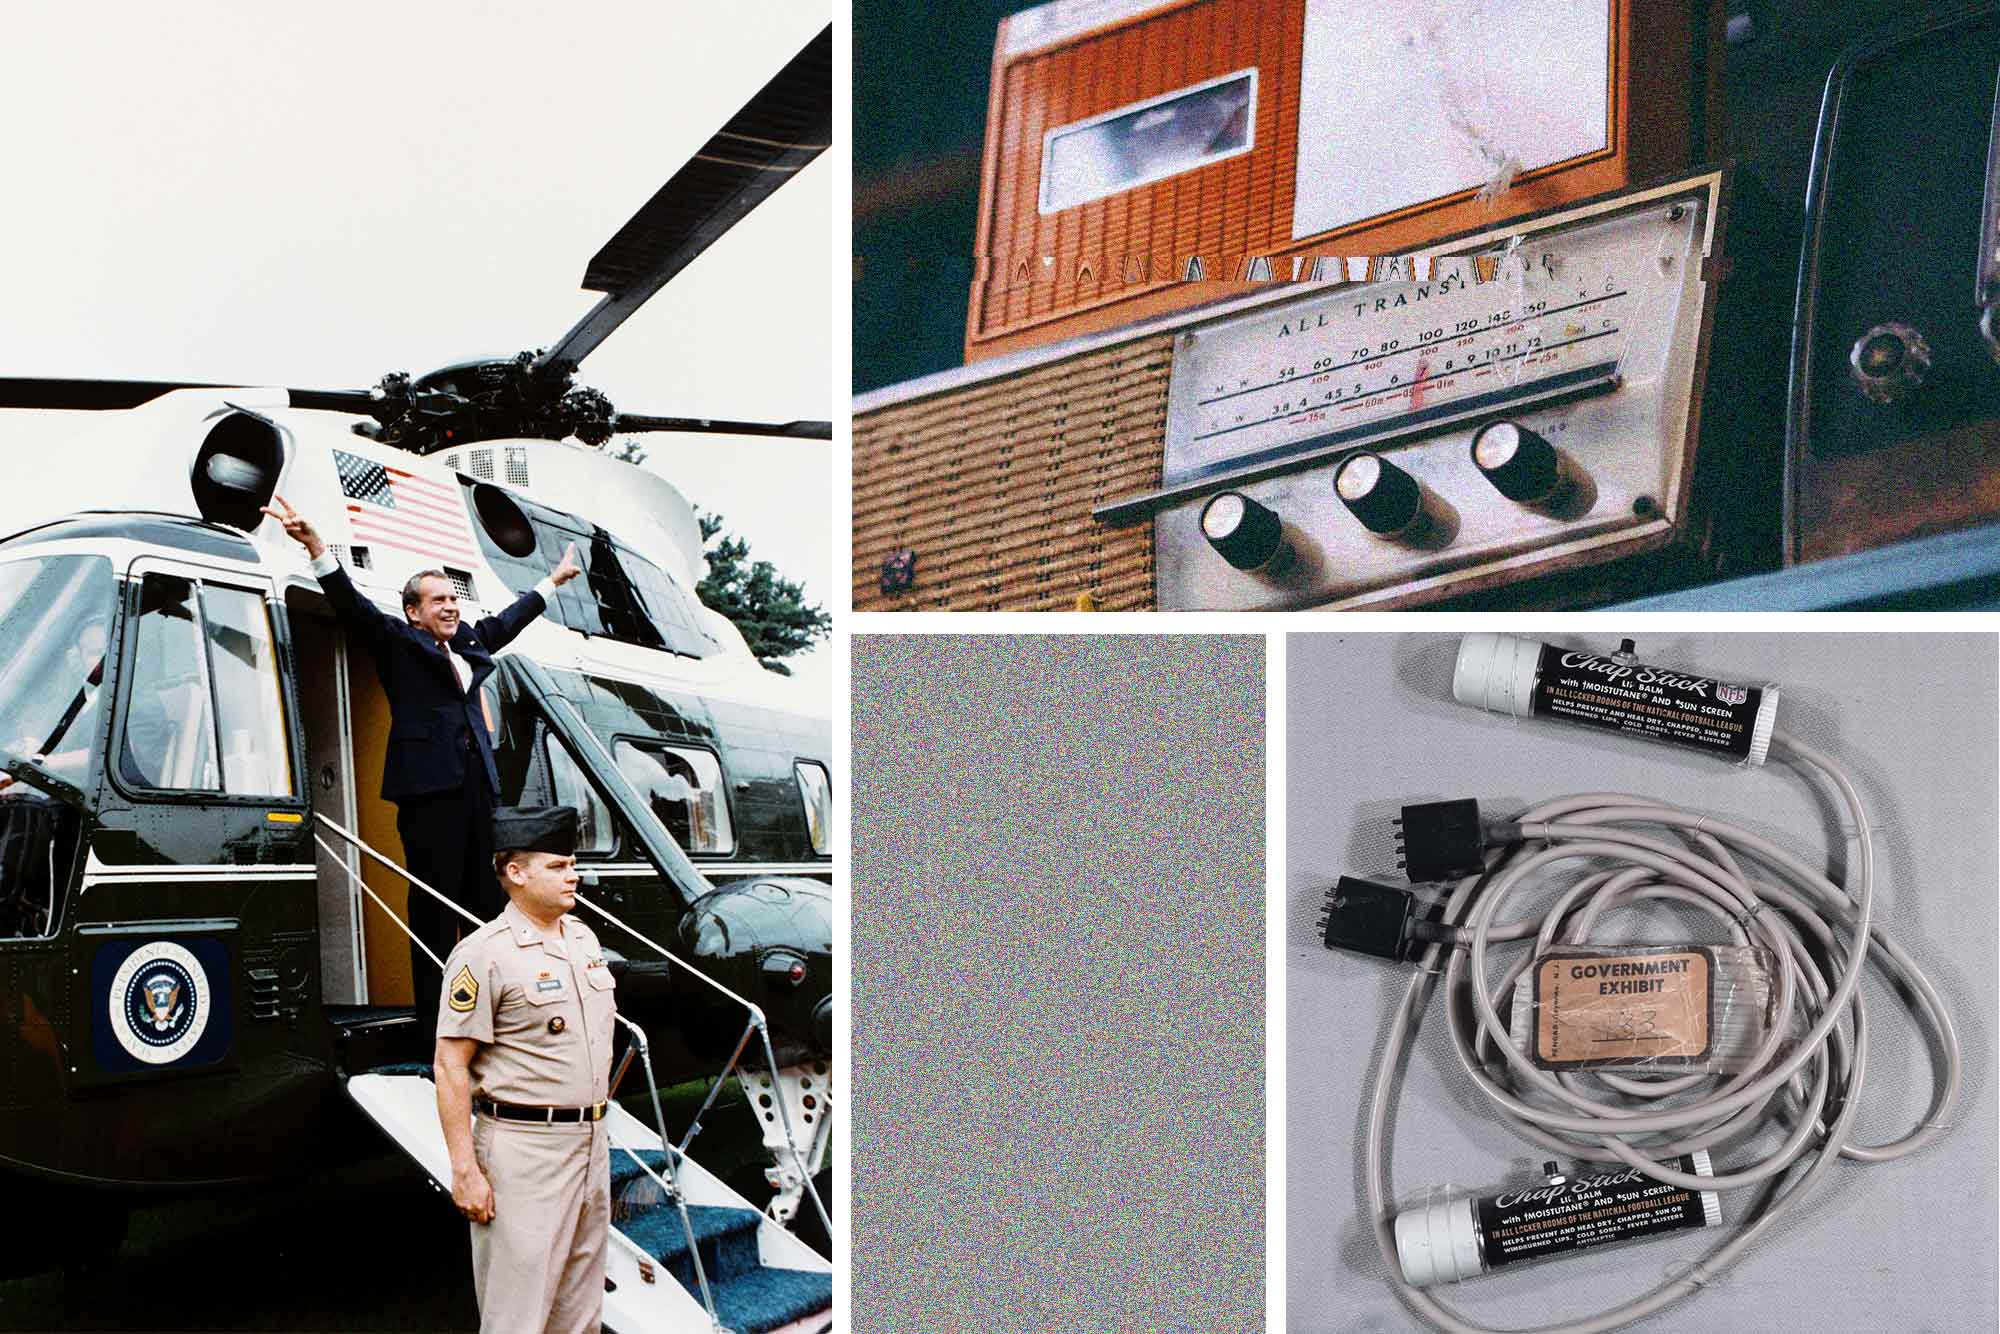 Nixon stands at the opening to a helicopter, his hands forming peace signs alongside a vintage radio and two chapstick containers with wires attached.